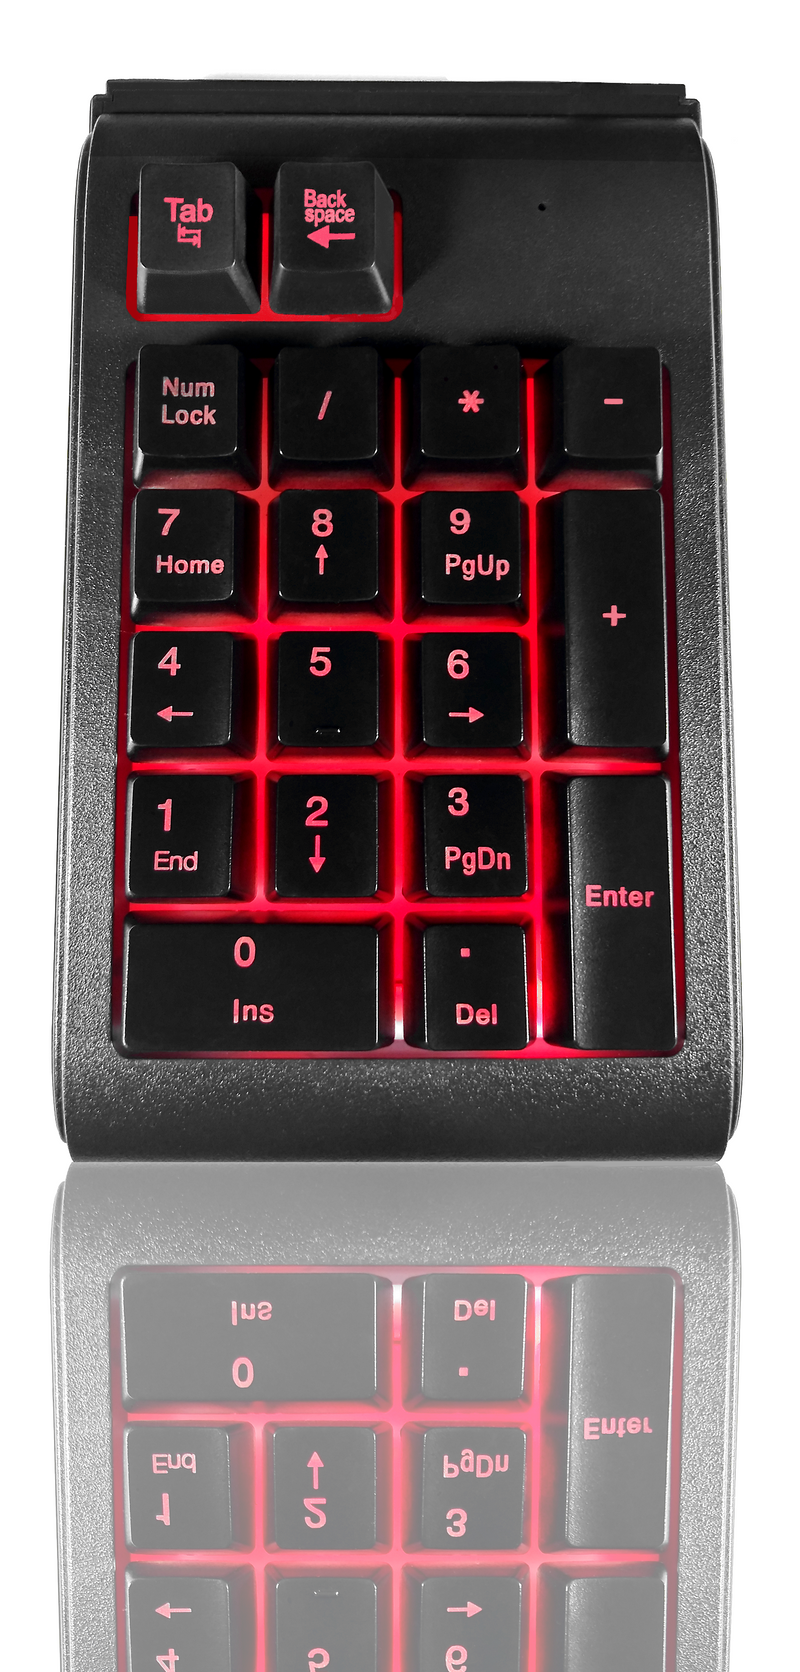 TRONWIRE 3 Color LED Backlit Illuminated 19 Key Wired USB Number Pad Numeric Keypad For Laptop Desktop PC Computer